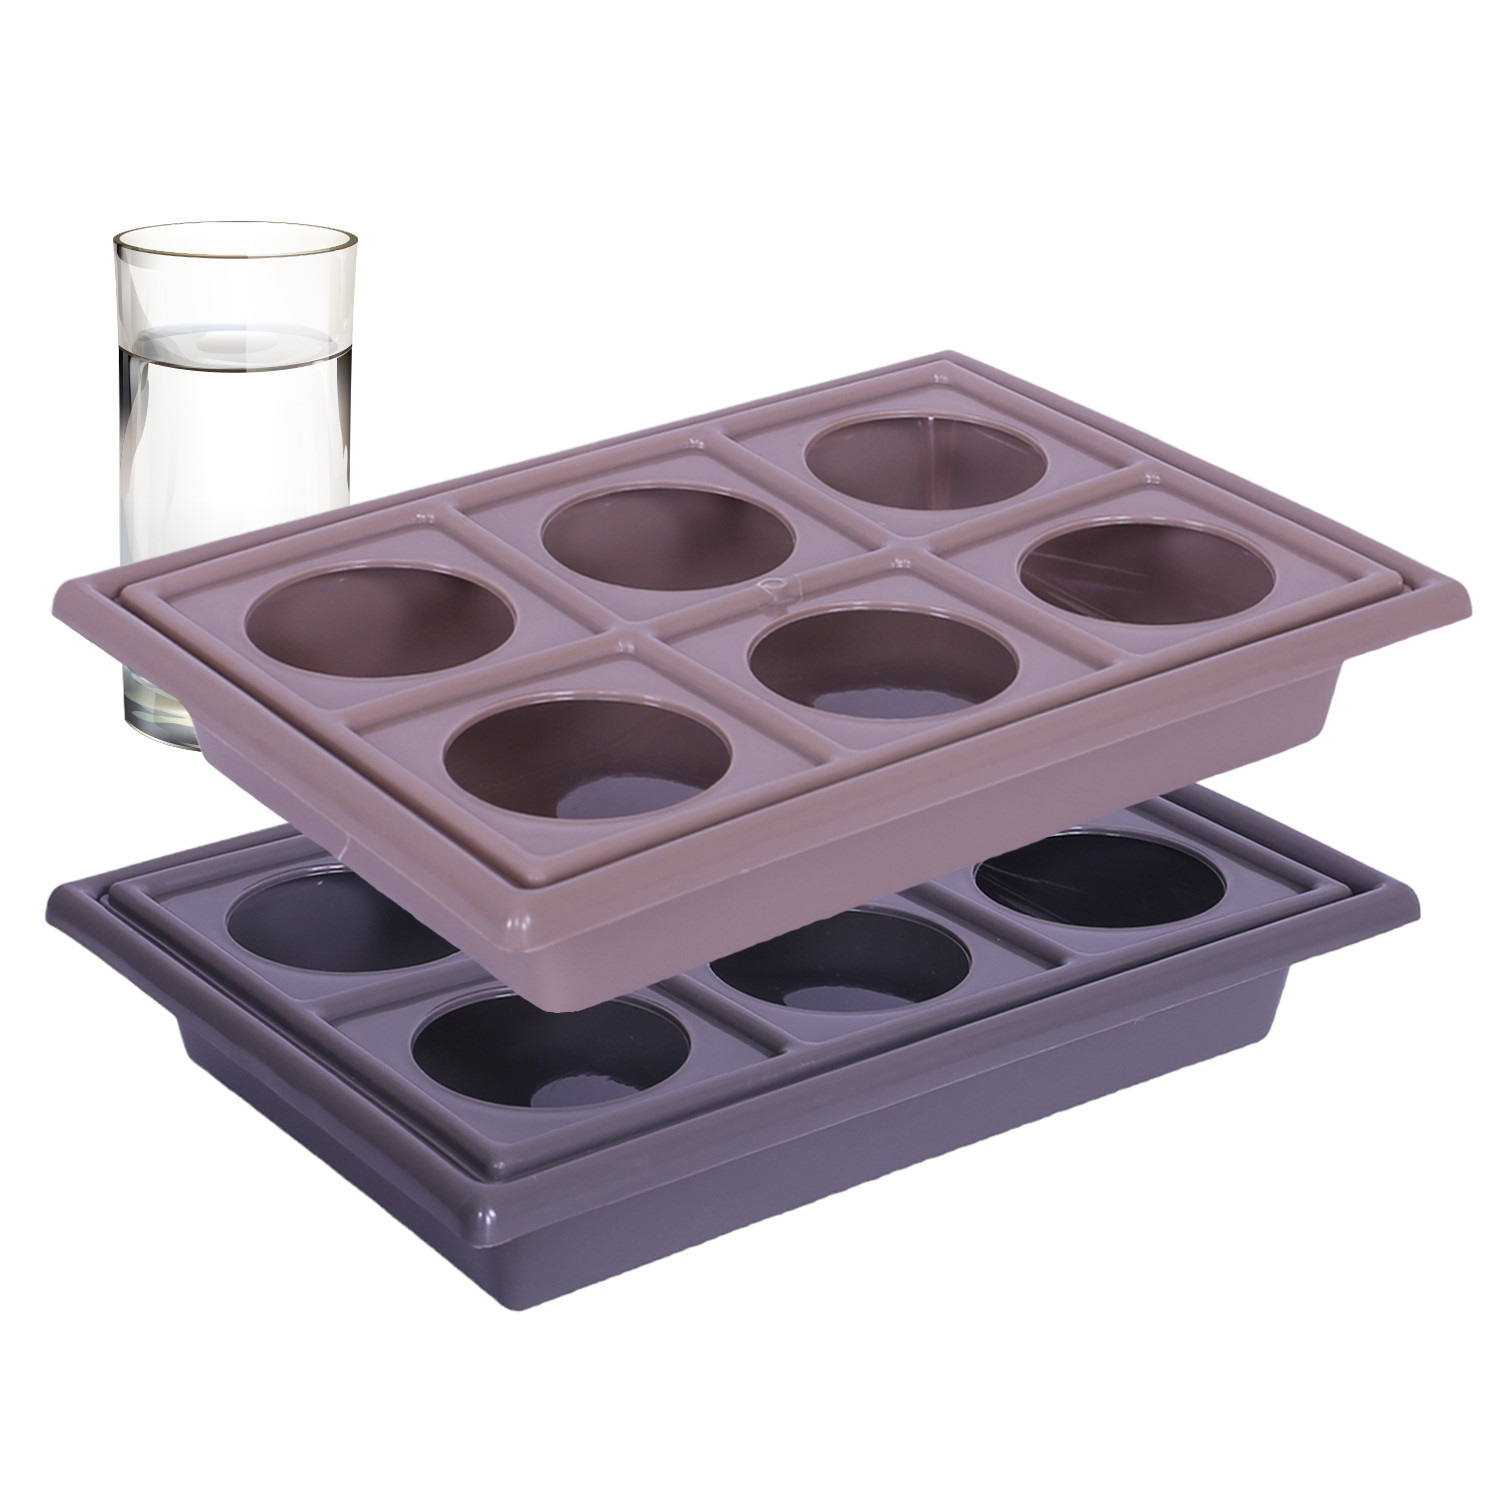 Kuber Industries Glass Tray | Plastic Glass Holder | Tray with Cutout Handles | Glass Serving Tray | Glass Holder Tray for Seving | Kitchen Serving Tray | Pack of 2 | Multi